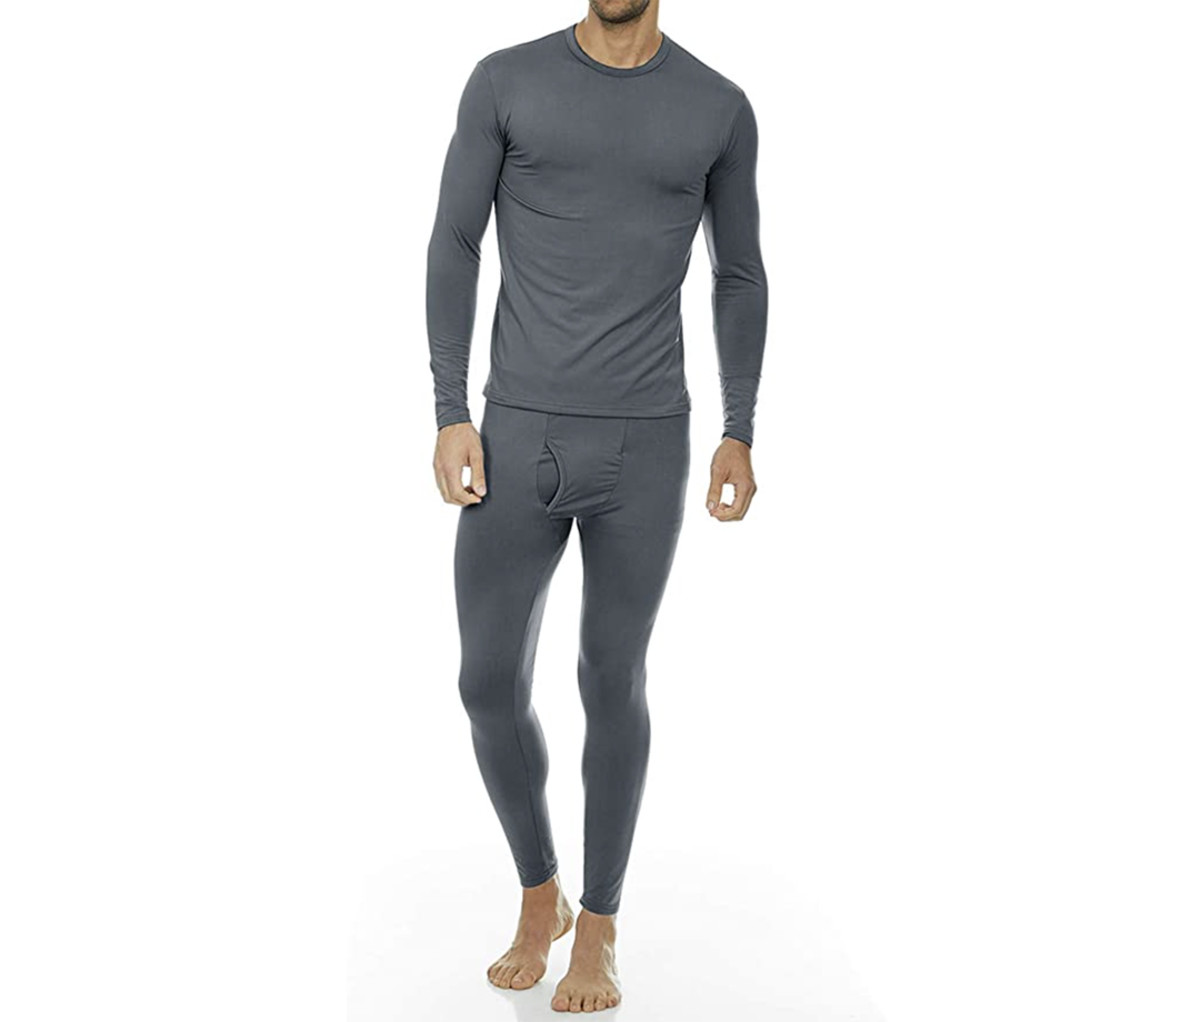 The Thermajohn Long Johns Set is Ideal for Cold Winter Nights at Home ...